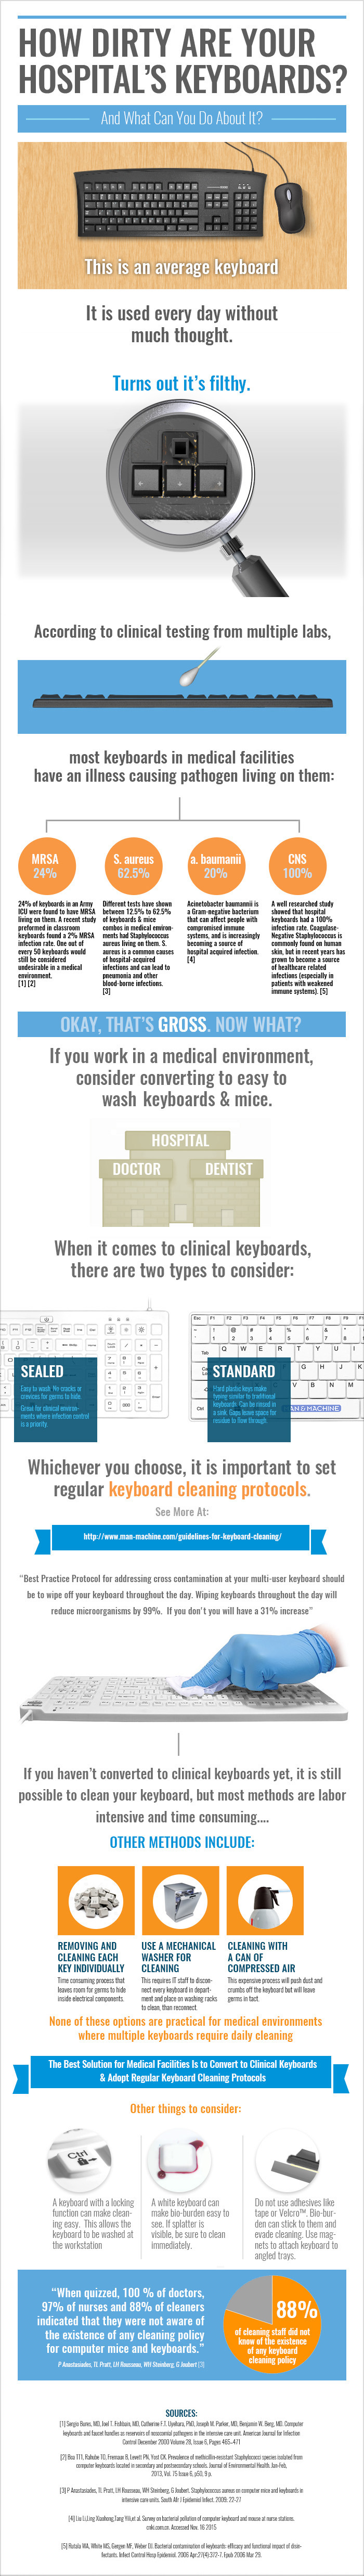 dirty keyboard infographic